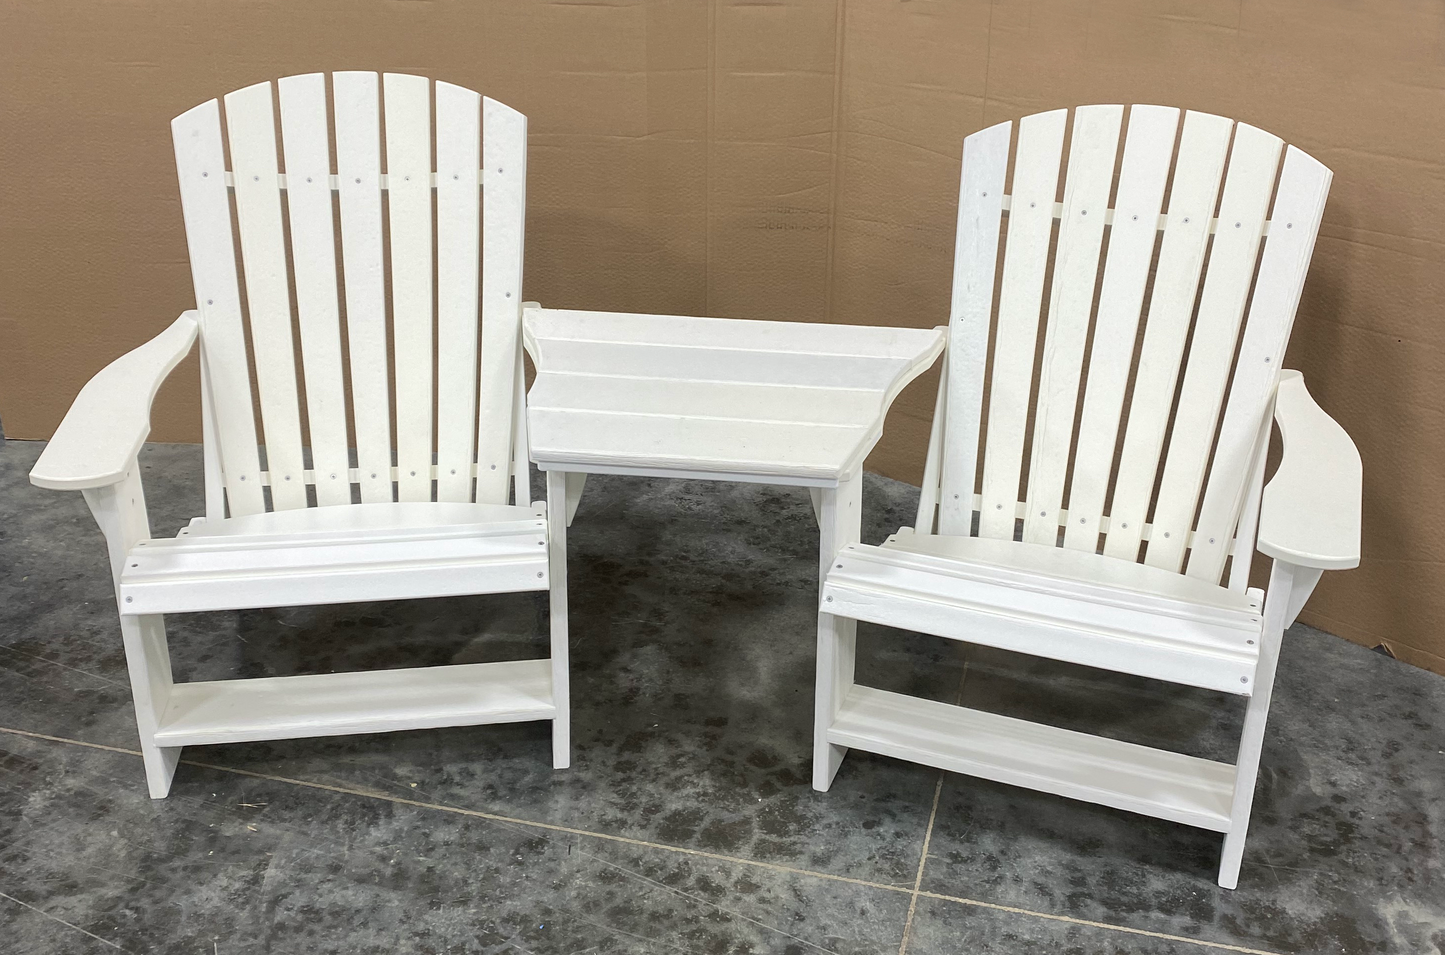 Wildridge Outdoor Recycled Plastic Tete a Tete Connecting Table (CHAIRS SOLD SEPARATELY) - LEAD TIME TO SHIP 4 WEEKS